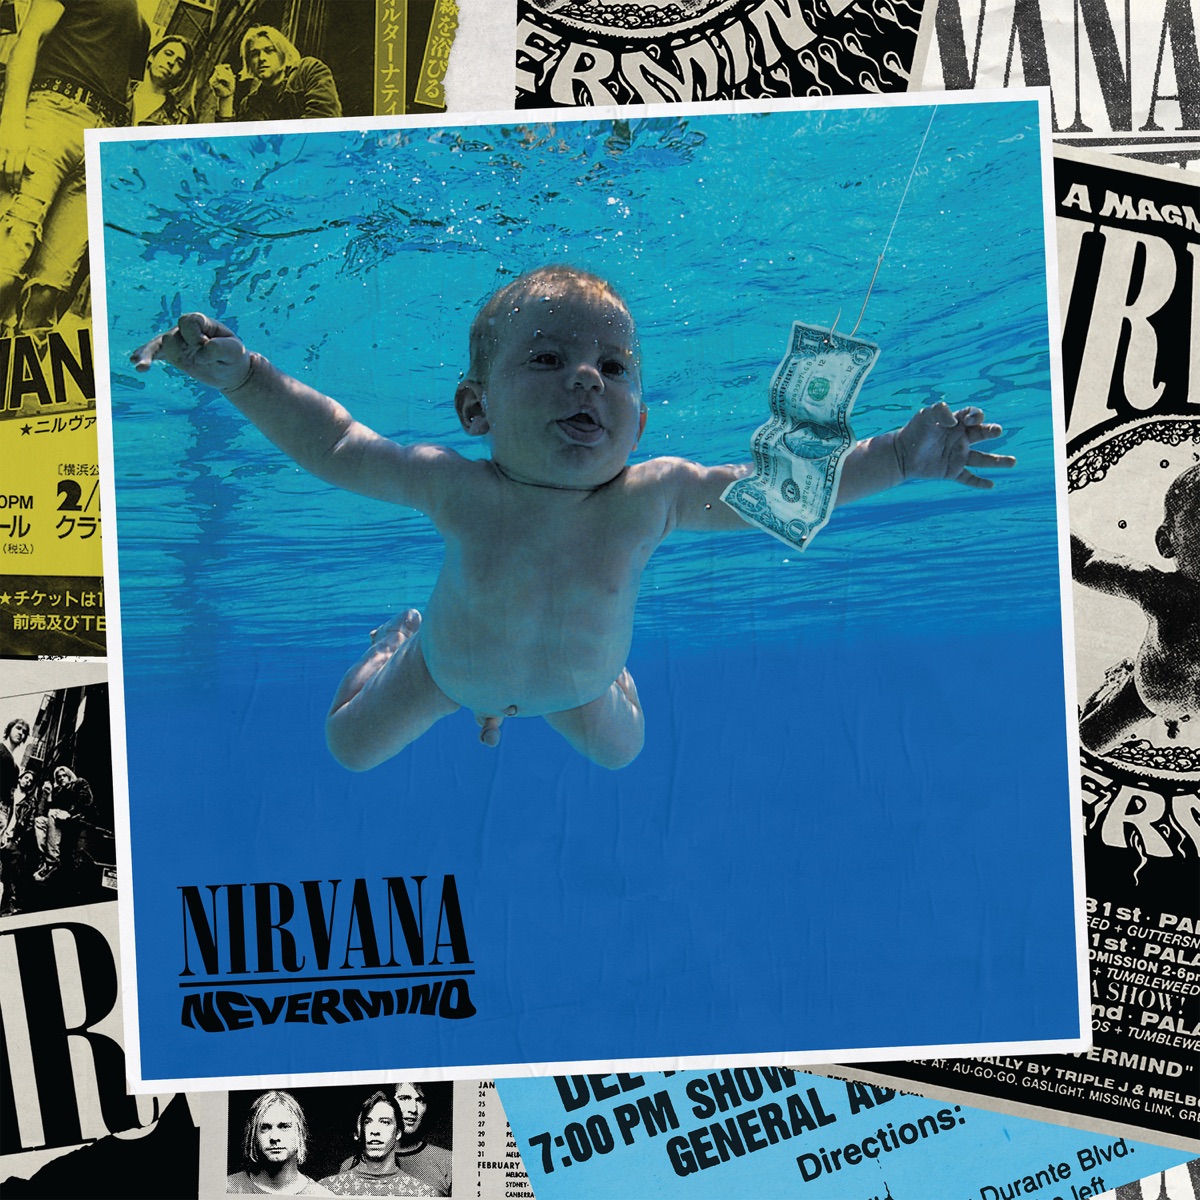 Nevermind (30th Anniversary Super Deluxe) by Nirvana on Apple Music